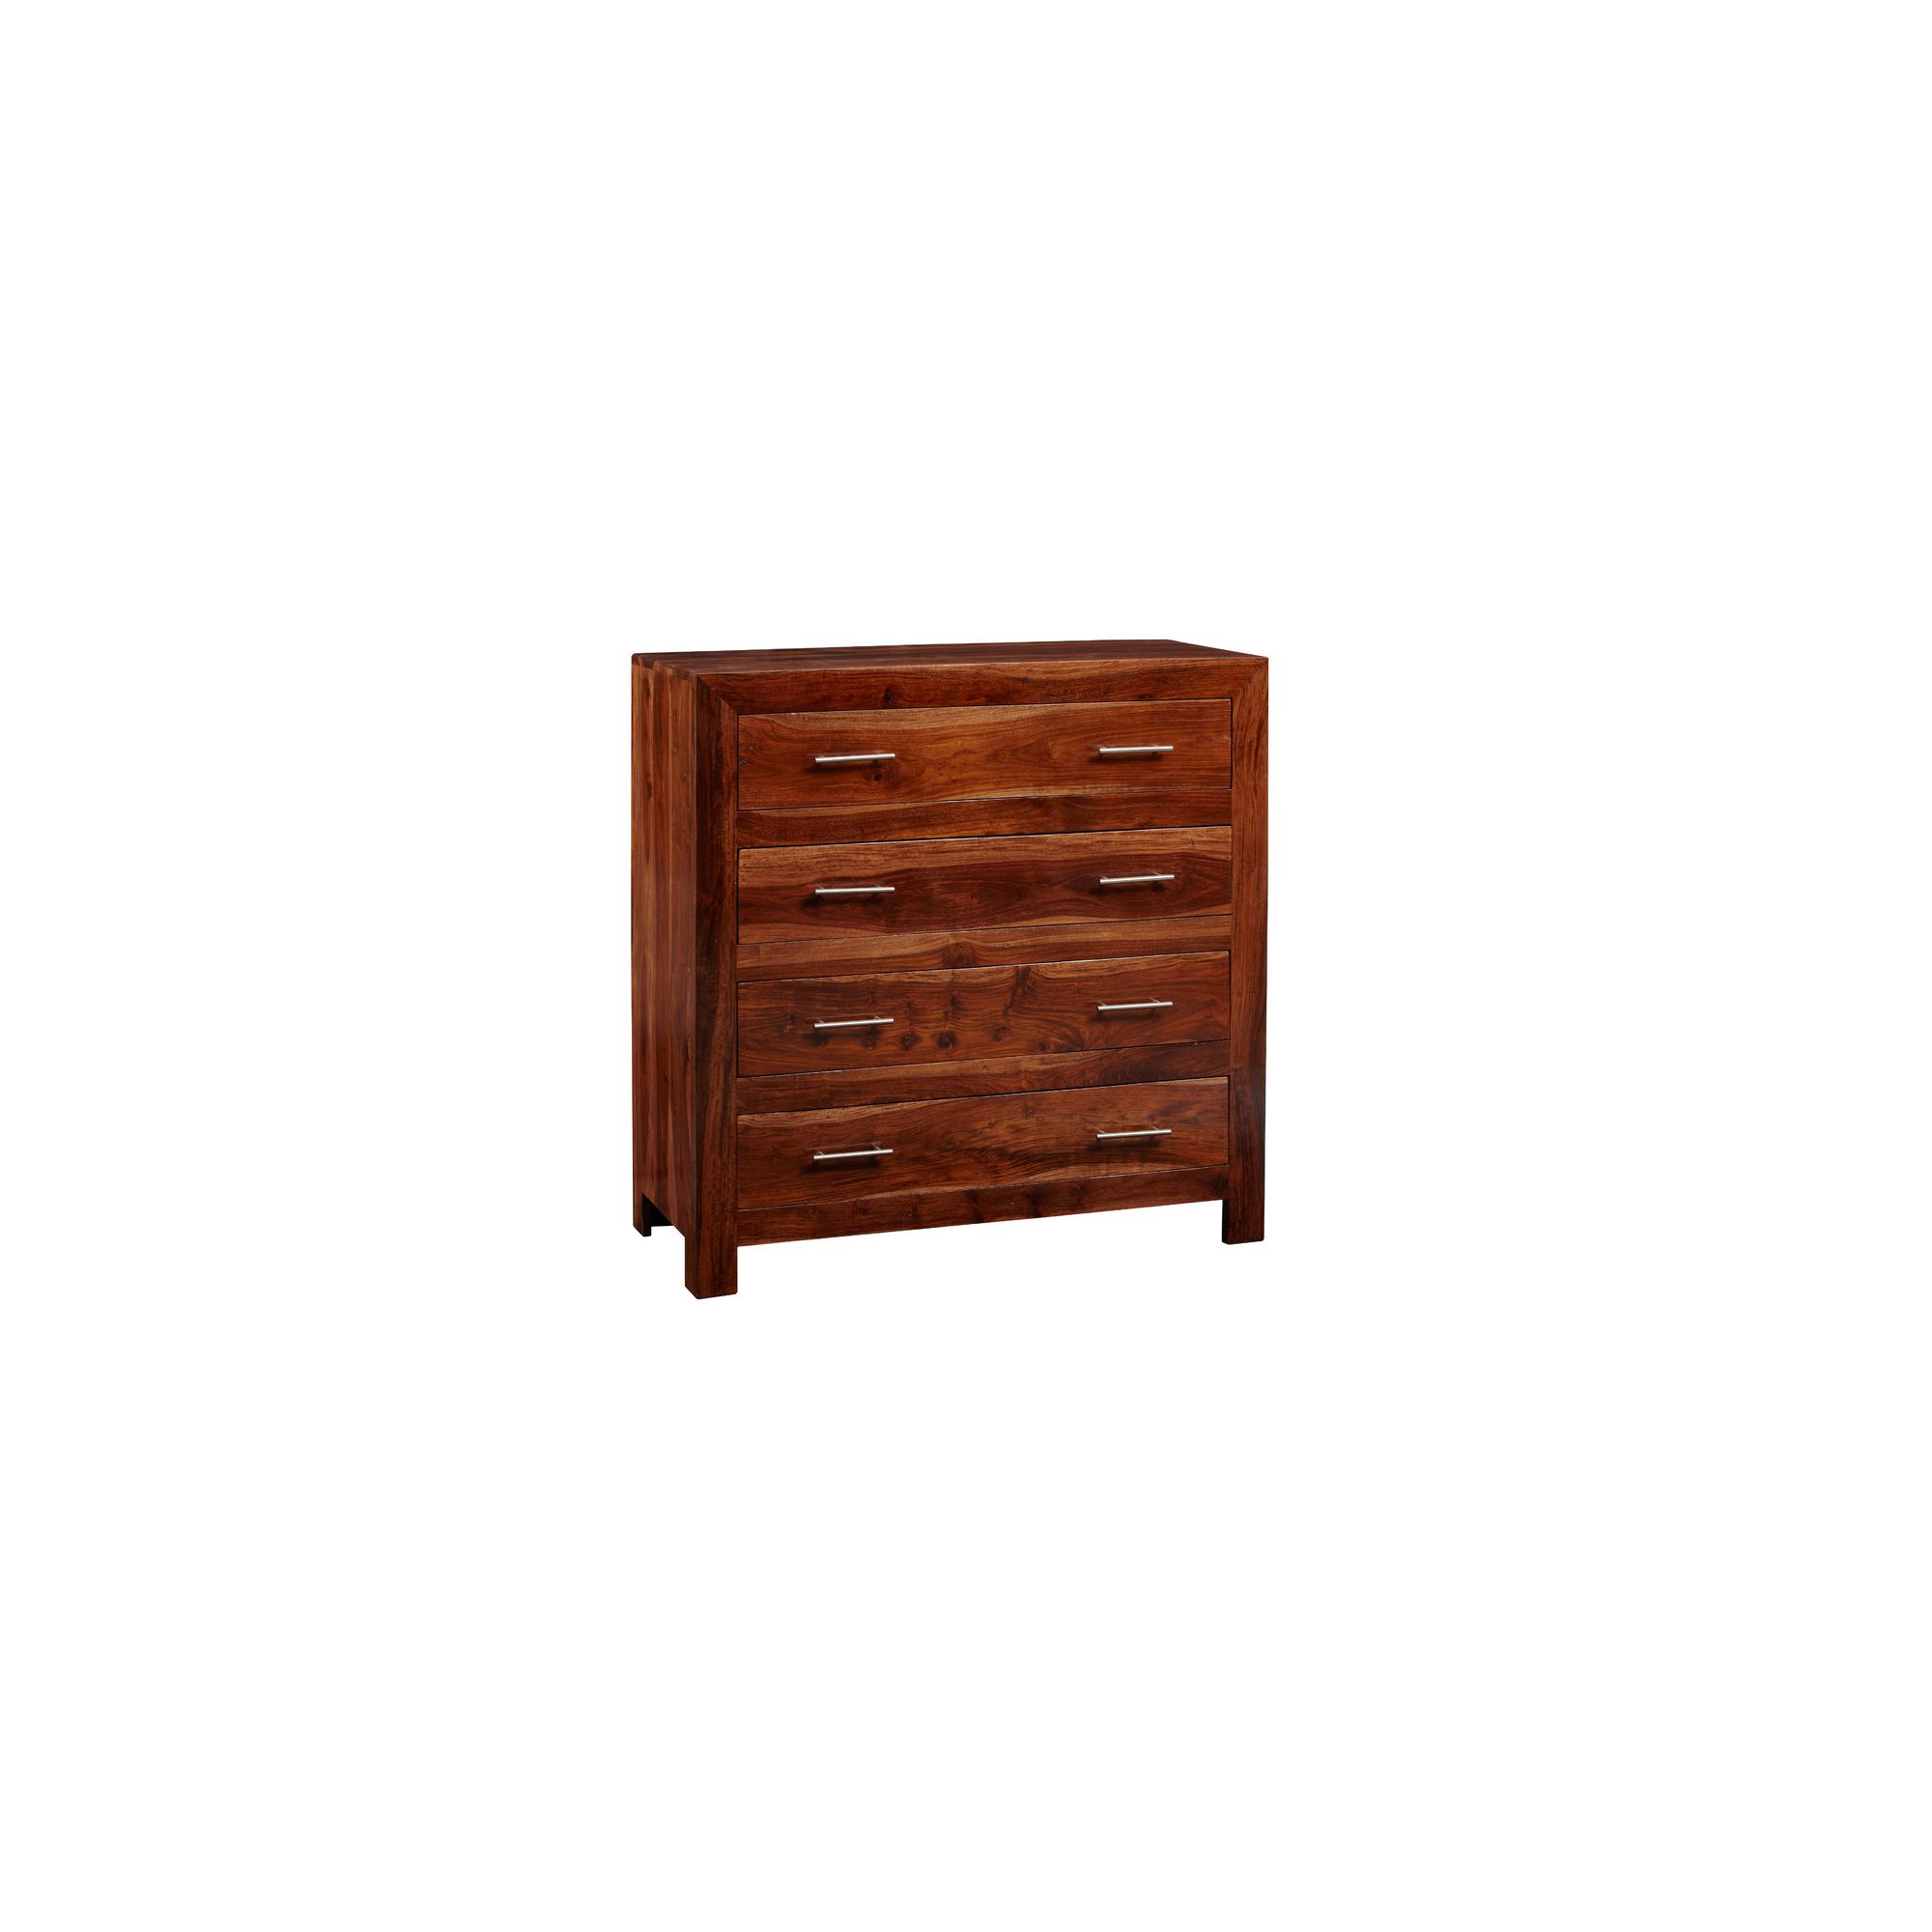 Indian Hub Cube Sheesham Two Over Three Drawers Chest at Tesco Direct